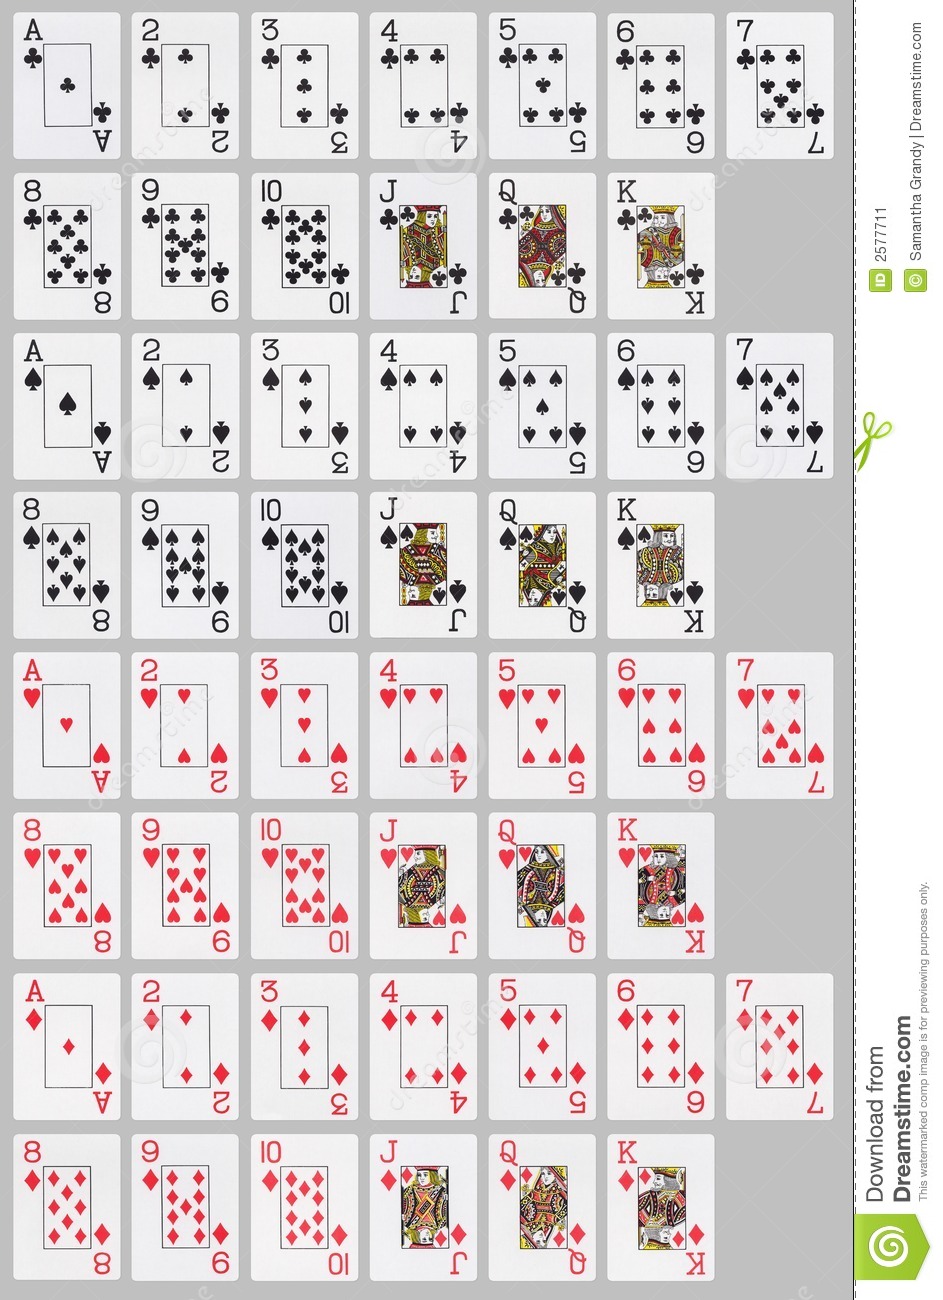 7-best-images-of-deck-of-52-printable-cards-standard-playing-card